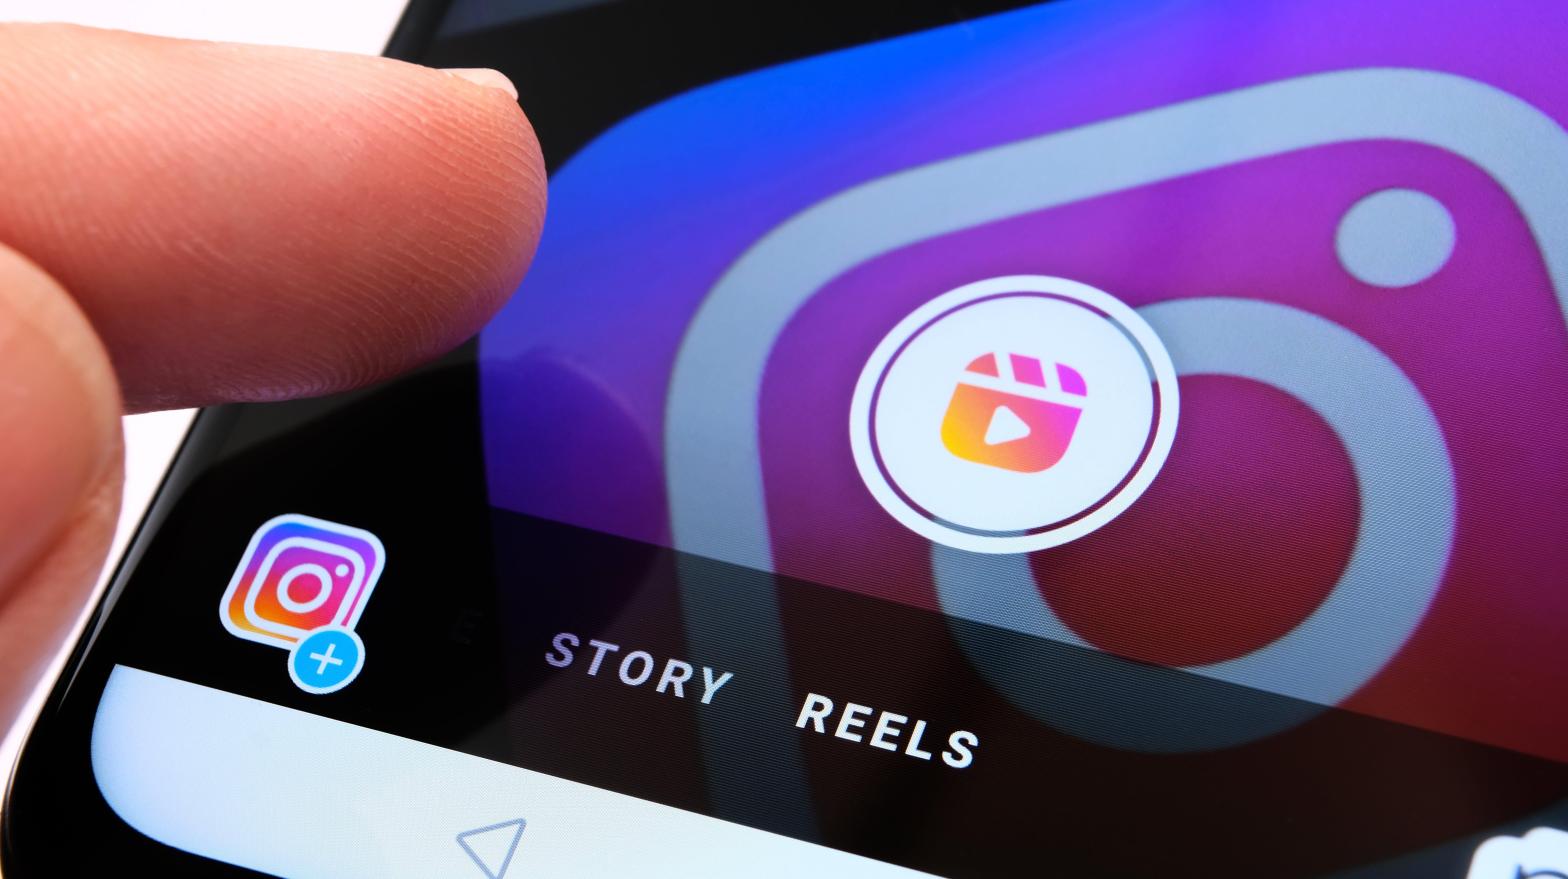 Instagram released Reels in August 2020, but the feature has been reportedly been floundering as audience engagement wanes.  (Image: Ascannio, Shutterstock)